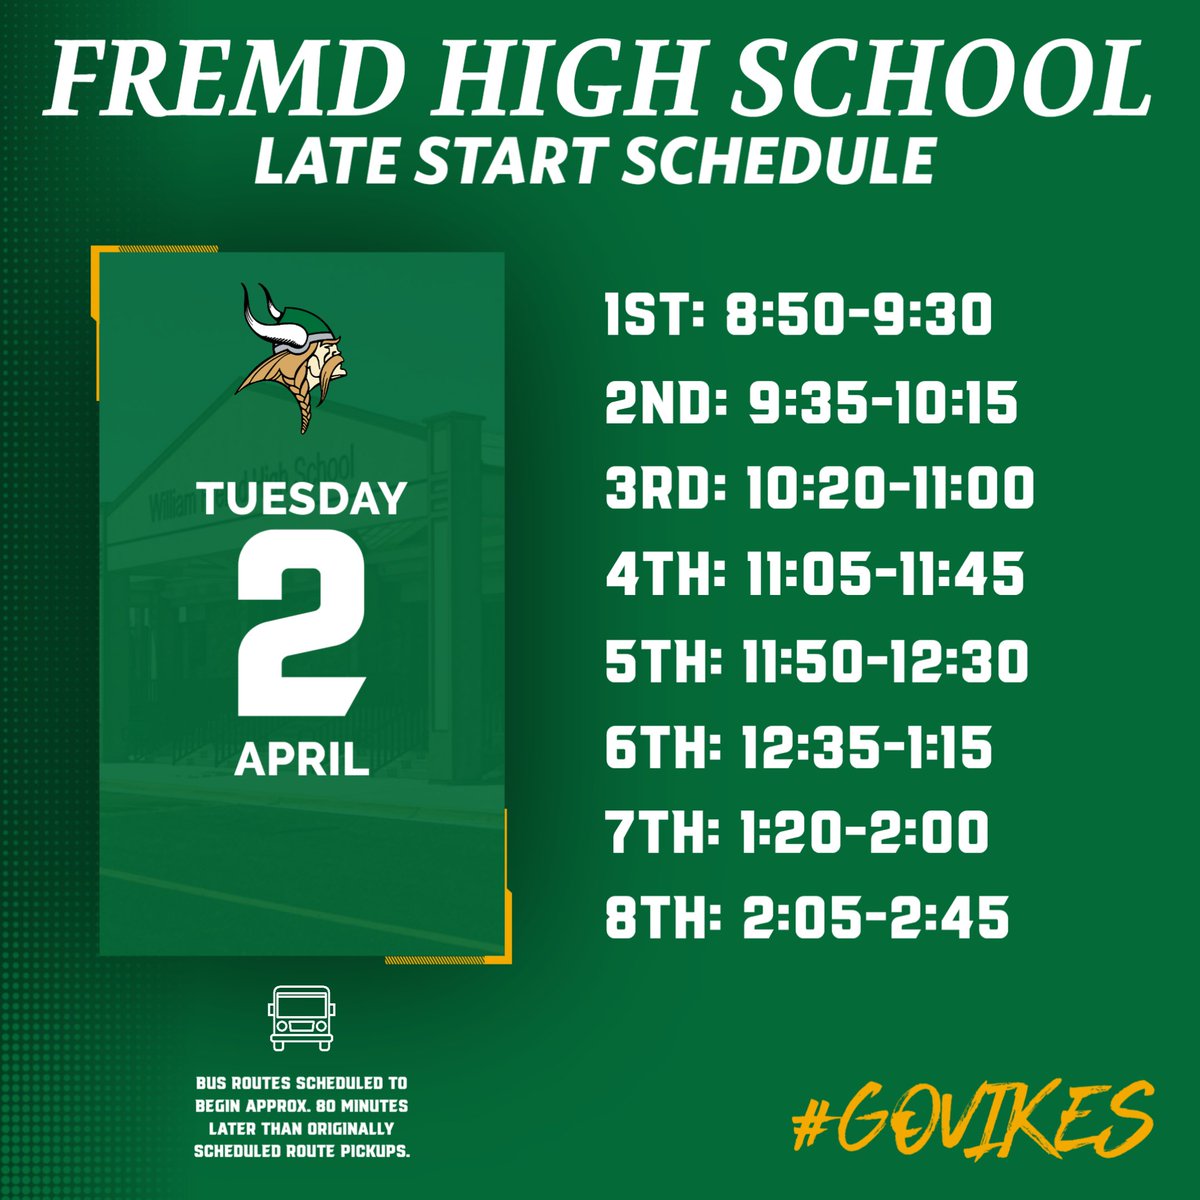 Fremd HS Late Start Schedule. Tuesday April 2. 1st : 8:50 - 9:30. 2nd: 9:35 - 10:15. 3rd 10:20 - 11:00. 4th 11:05 - 11:45. 5th: 11:50 - 12:30. 6th 12:35 - 1:15. 7th 1:20 - 2:00. 8th 2:05 - 2:45.